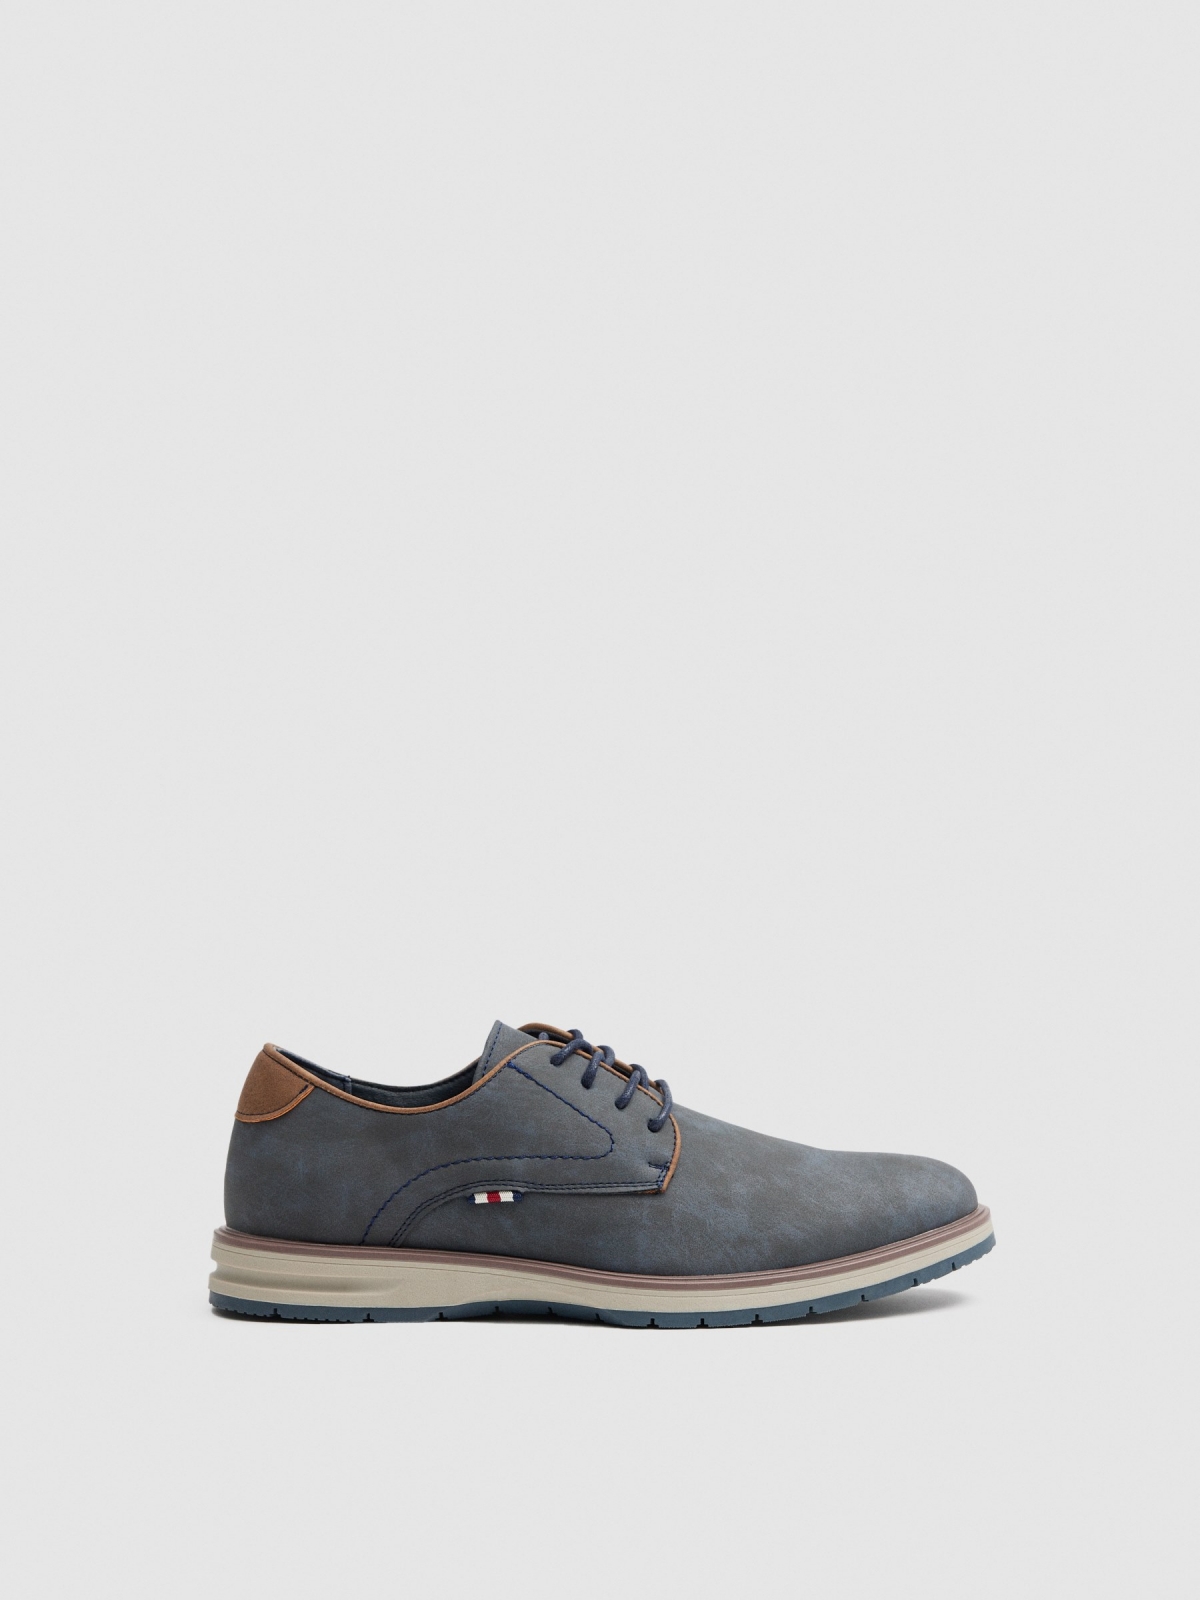 Blucher shoes with piping